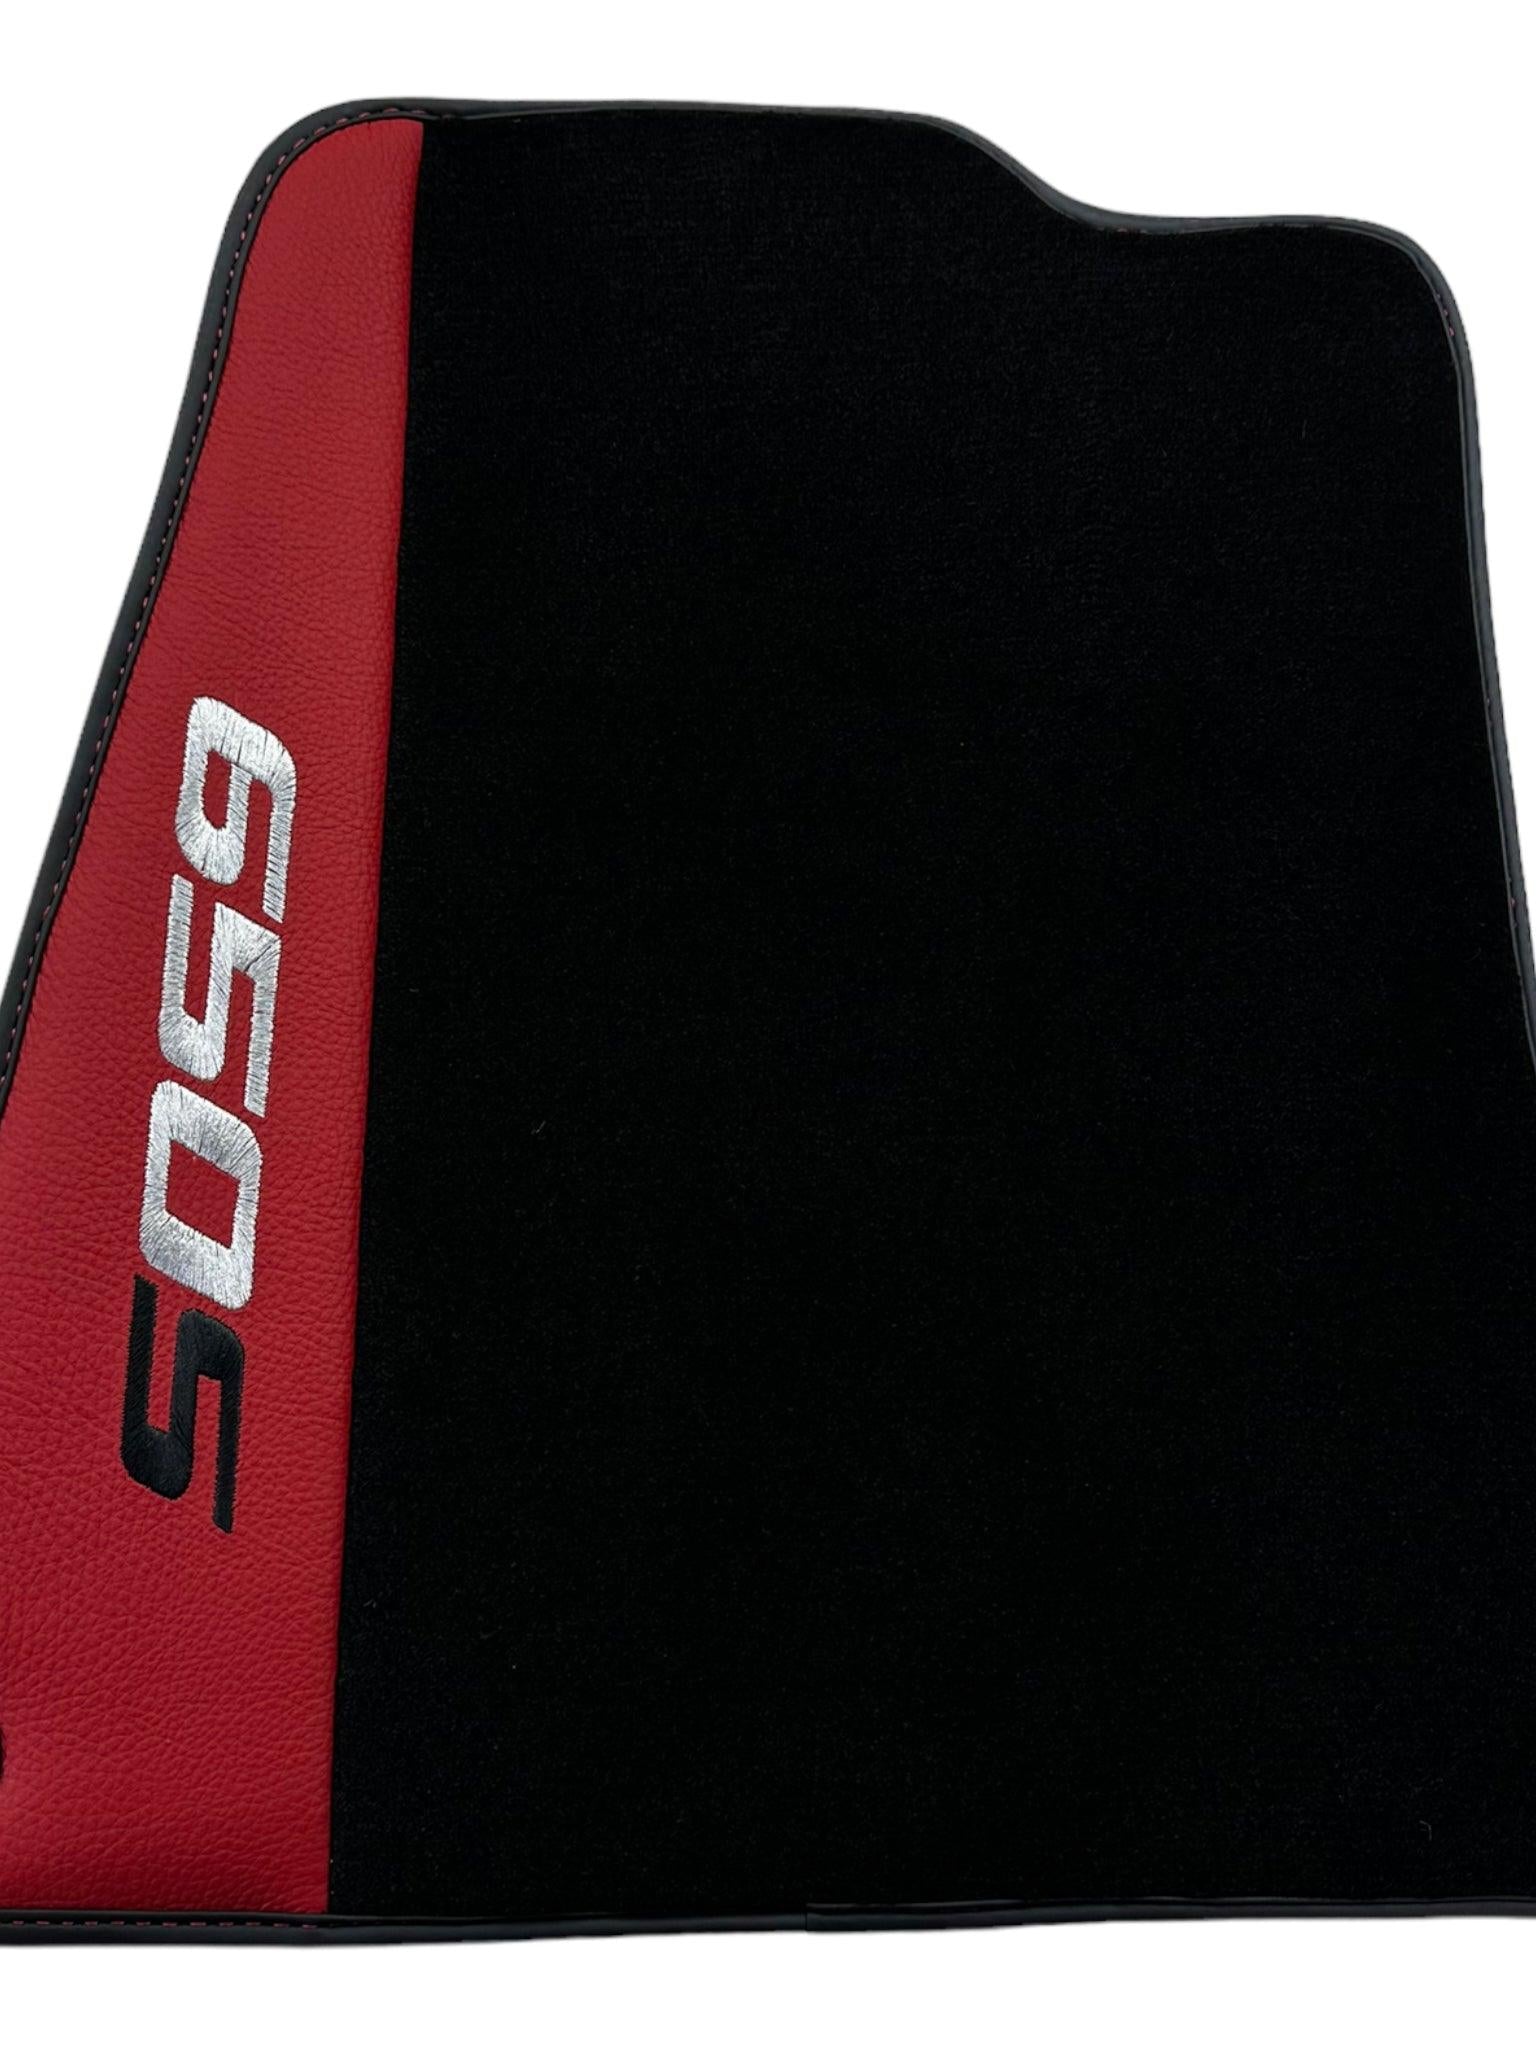 Black Floor Mats For McLaren 650S Black Tailored With Red Leather - AutoWin